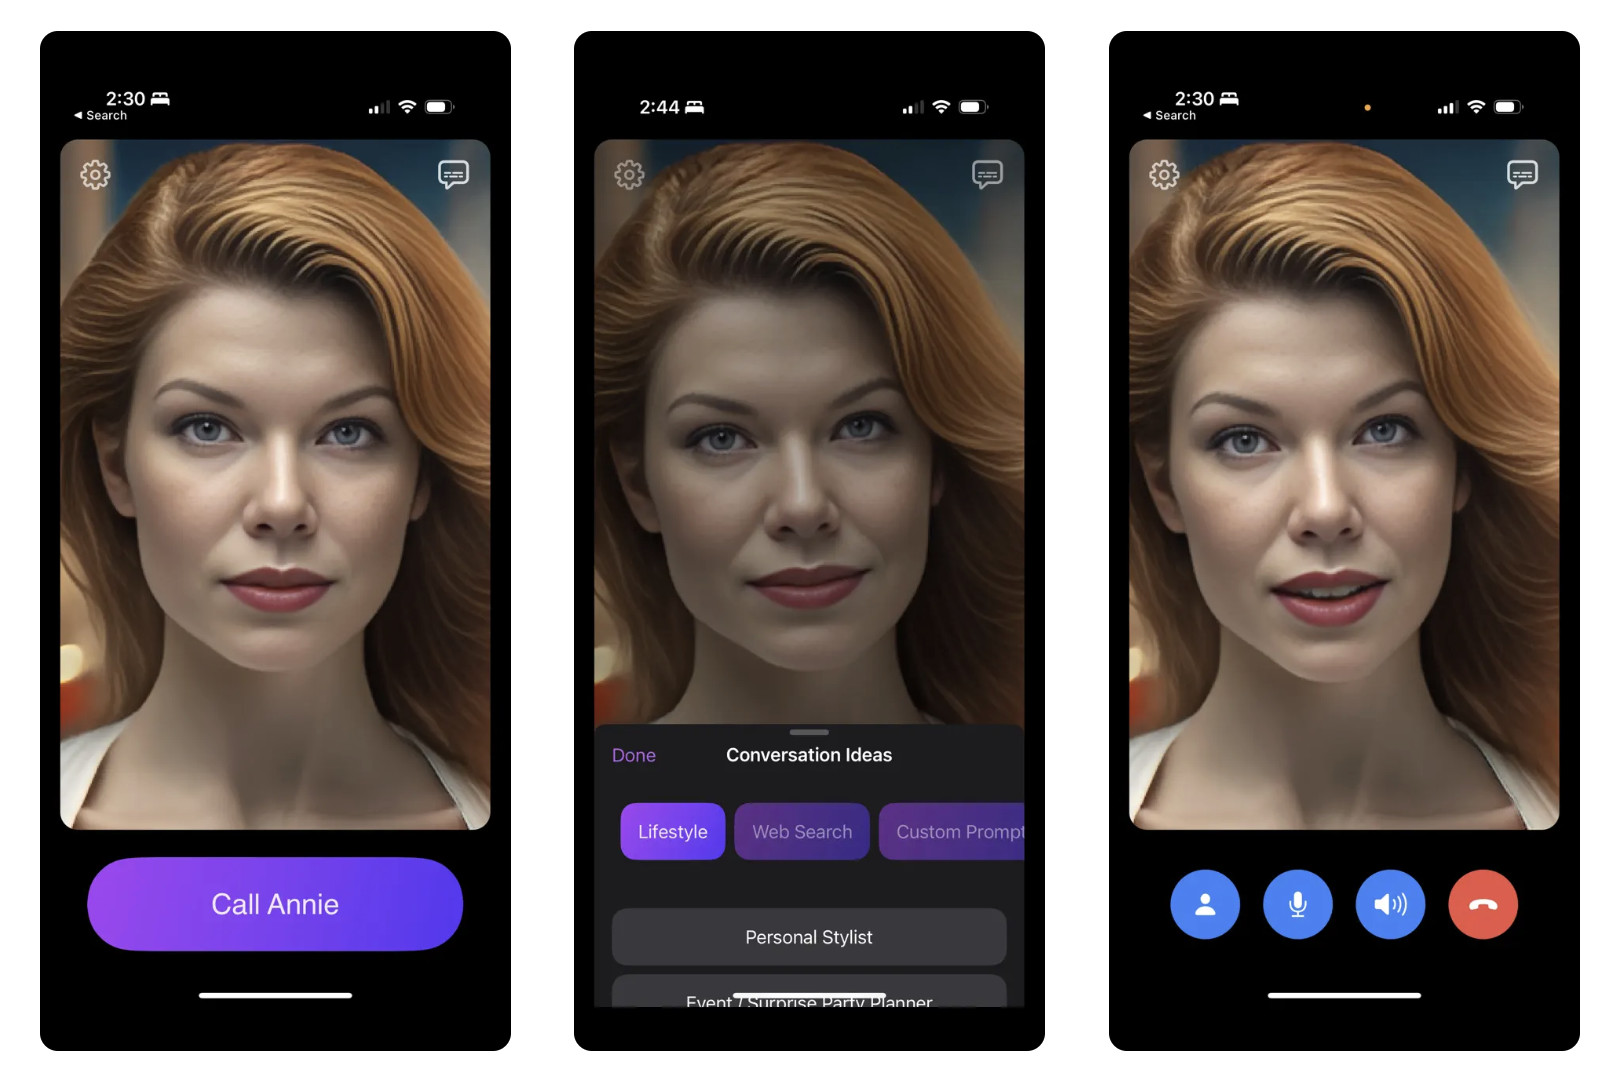 Call Annie: iPhone app released that allows you to talk to ChatGPT via video call